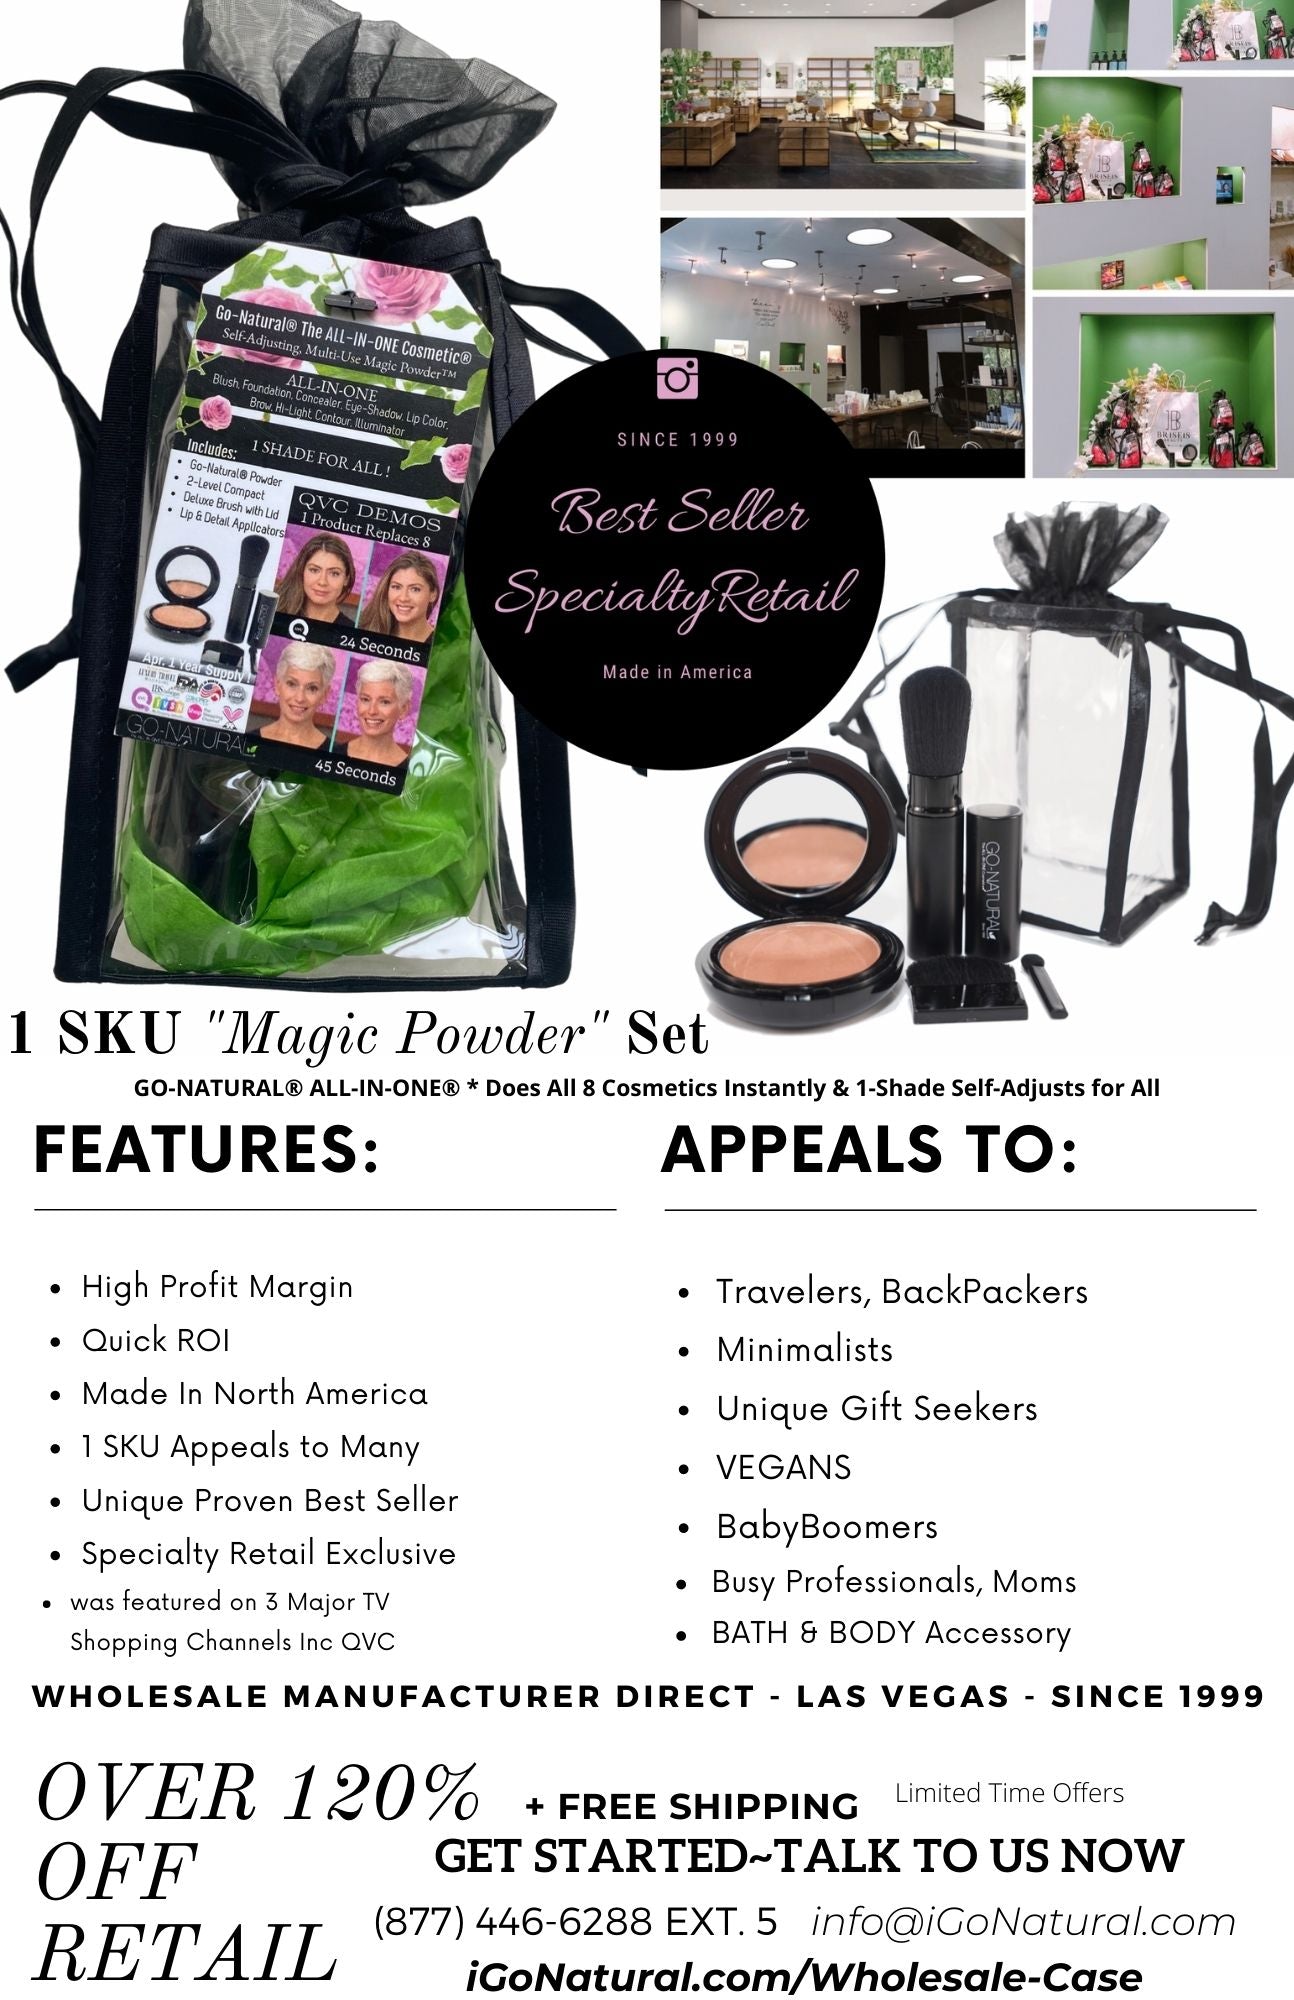 WHOLESALE AD - RETAIL PACKAGING - Wholesale Best Seller GO-NATURAL® ALL-IN-ONE Cosmetic® 1-Shade Multi-Use "Magic Powder" ™ Manufacturer Direct Specialty Retail & Professional Beauty Exclusive  